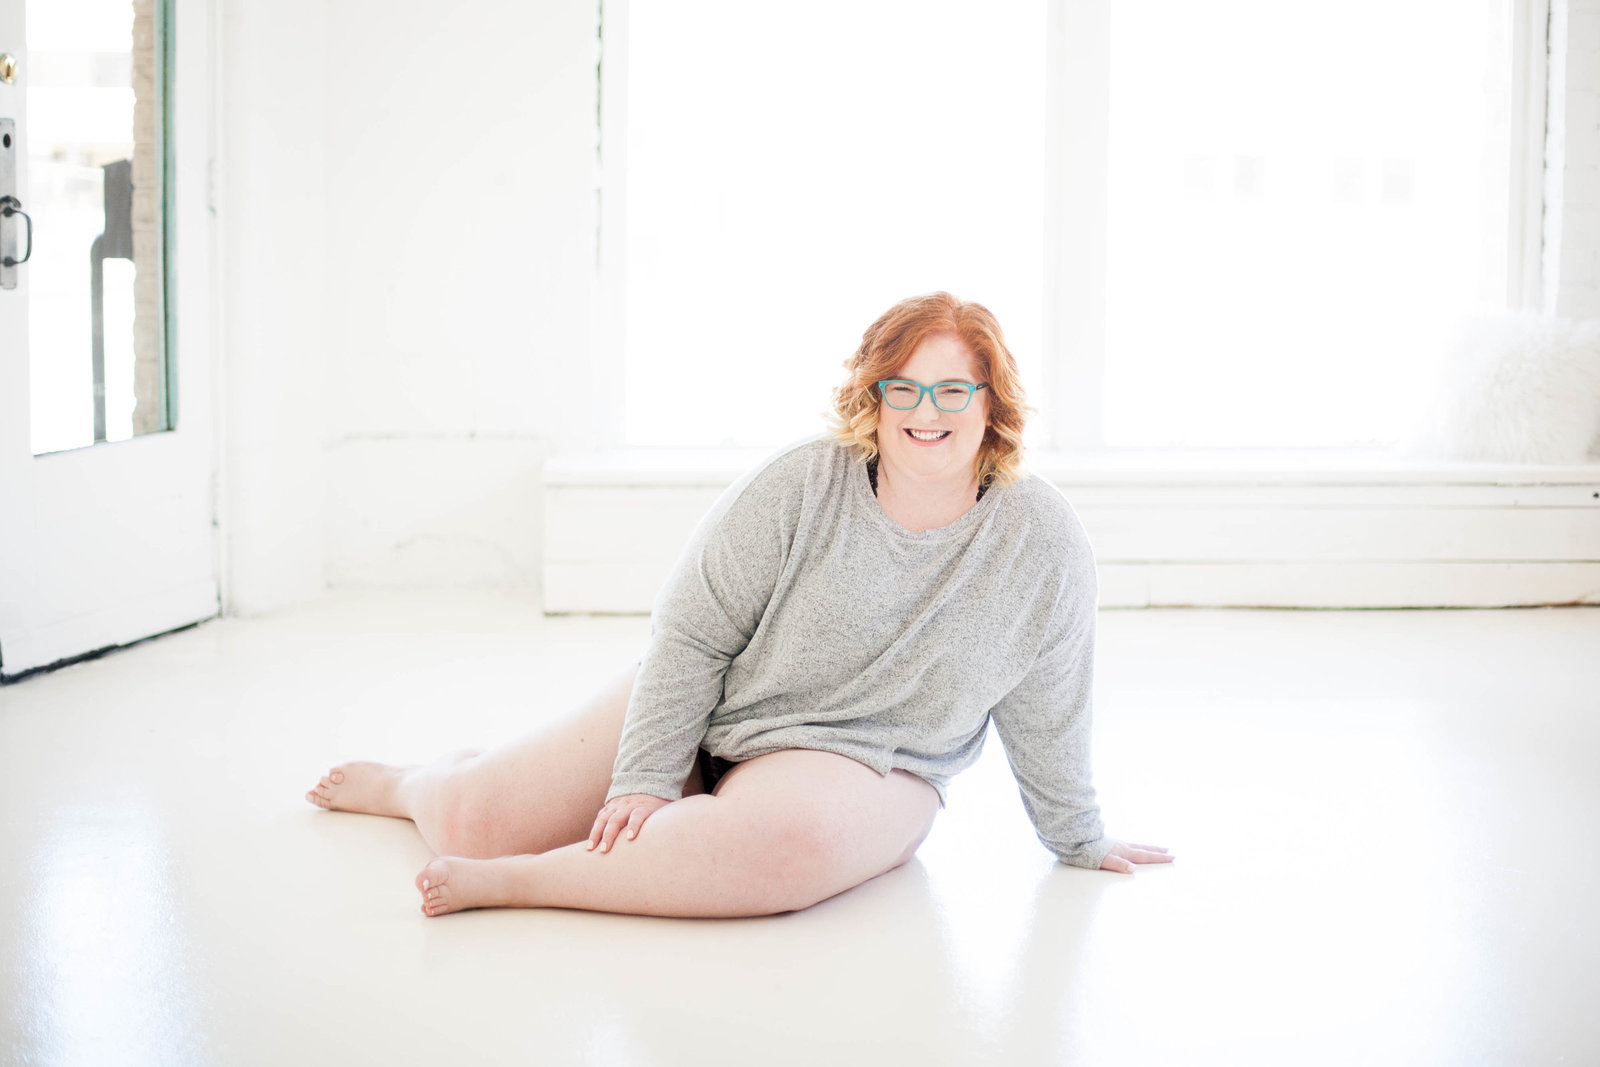 A woman wearing a grey sweater in a white room.